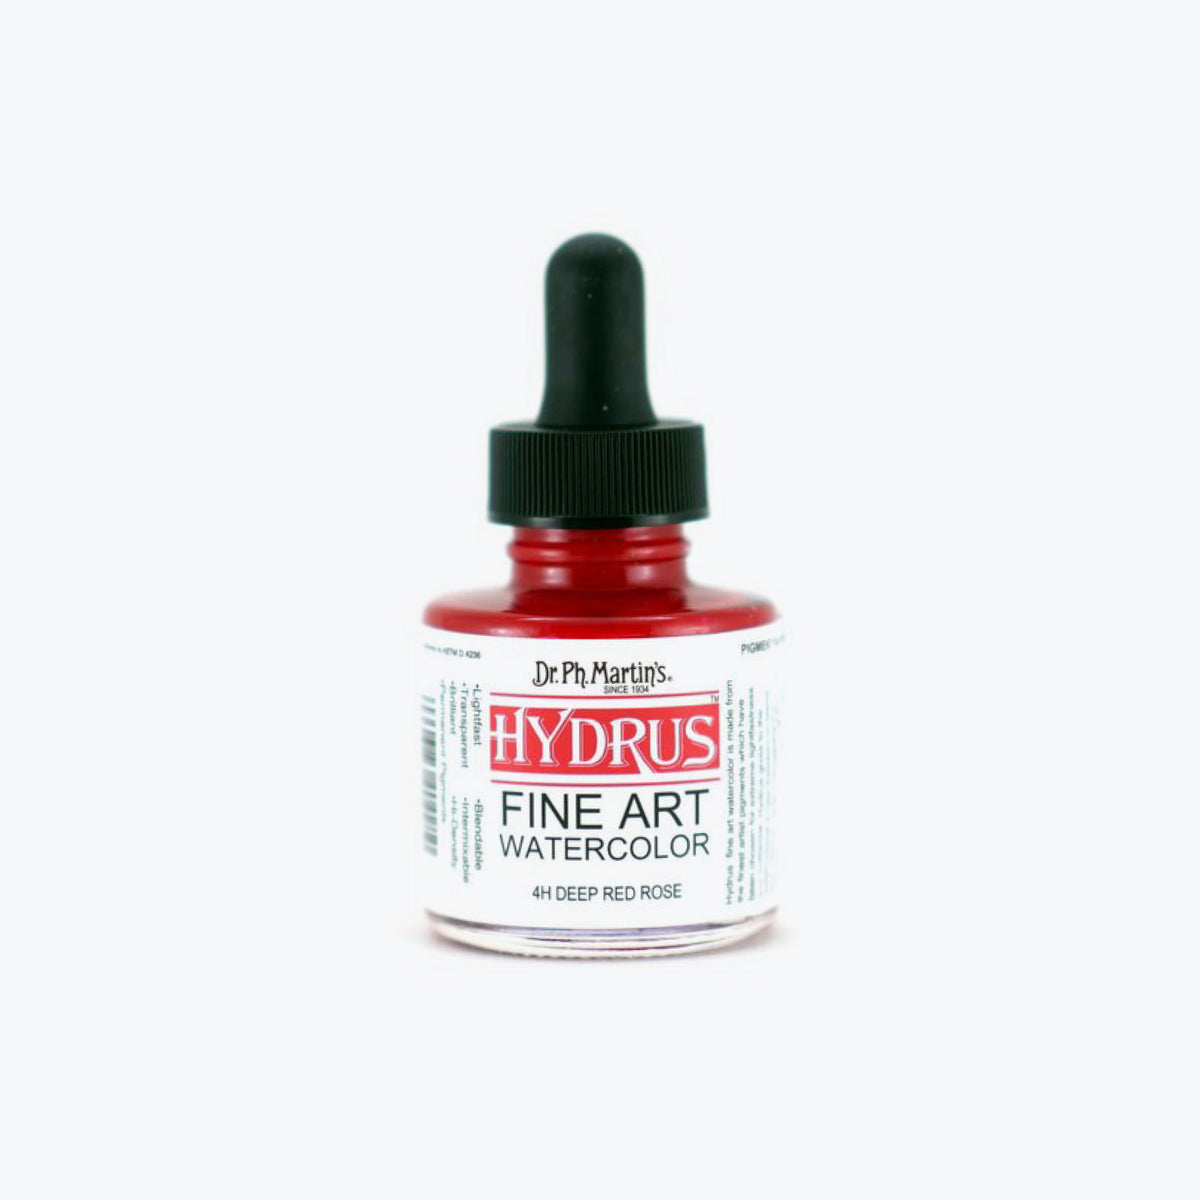 Dr. Ph. Martin's - Watercolour - Hydrus - 4H Deep Red Rose